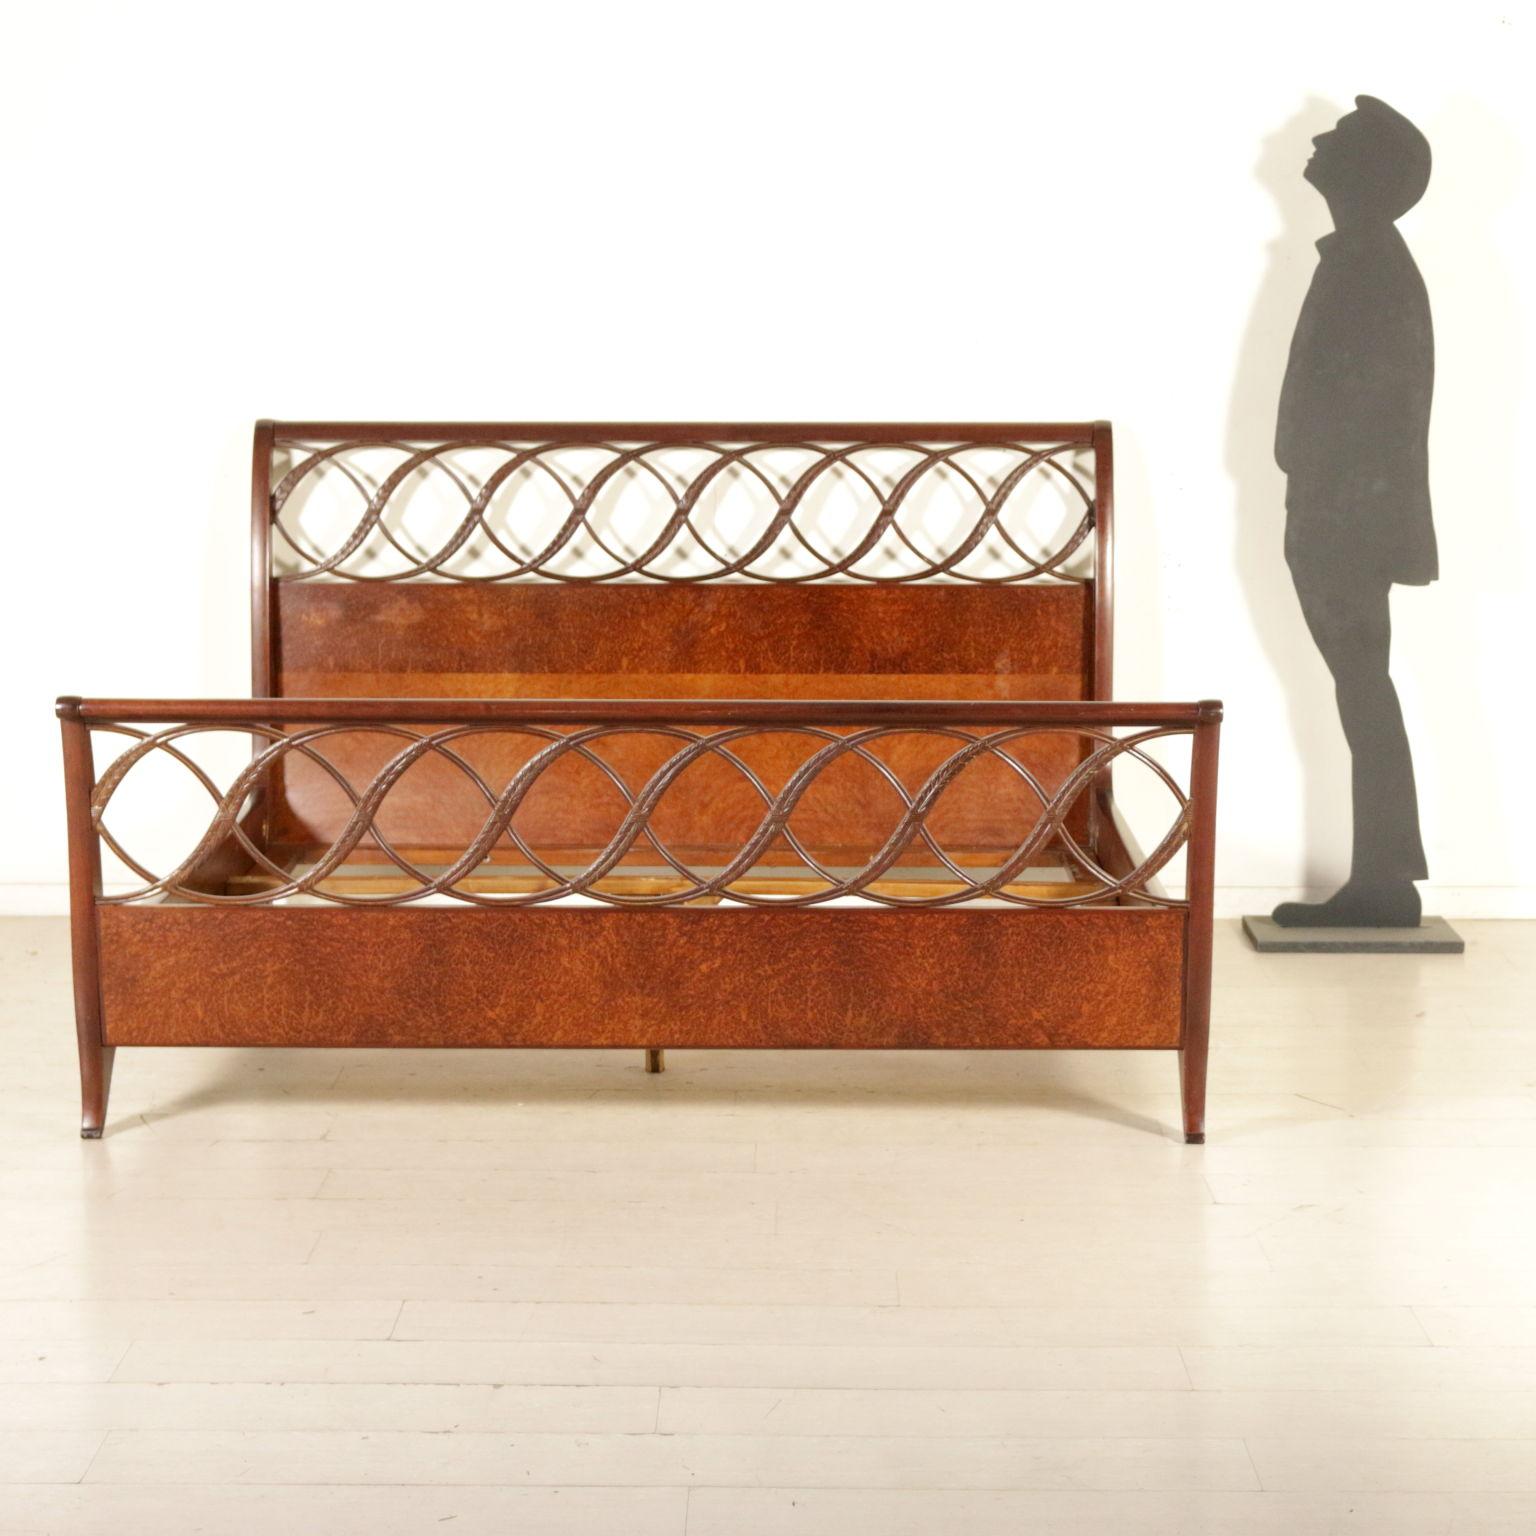 A double bed attributable to Paolo Buffa (1903-1970), mahogany, brier veneer, decorated with carved leaves. Manufactured in Italy, 1950s.